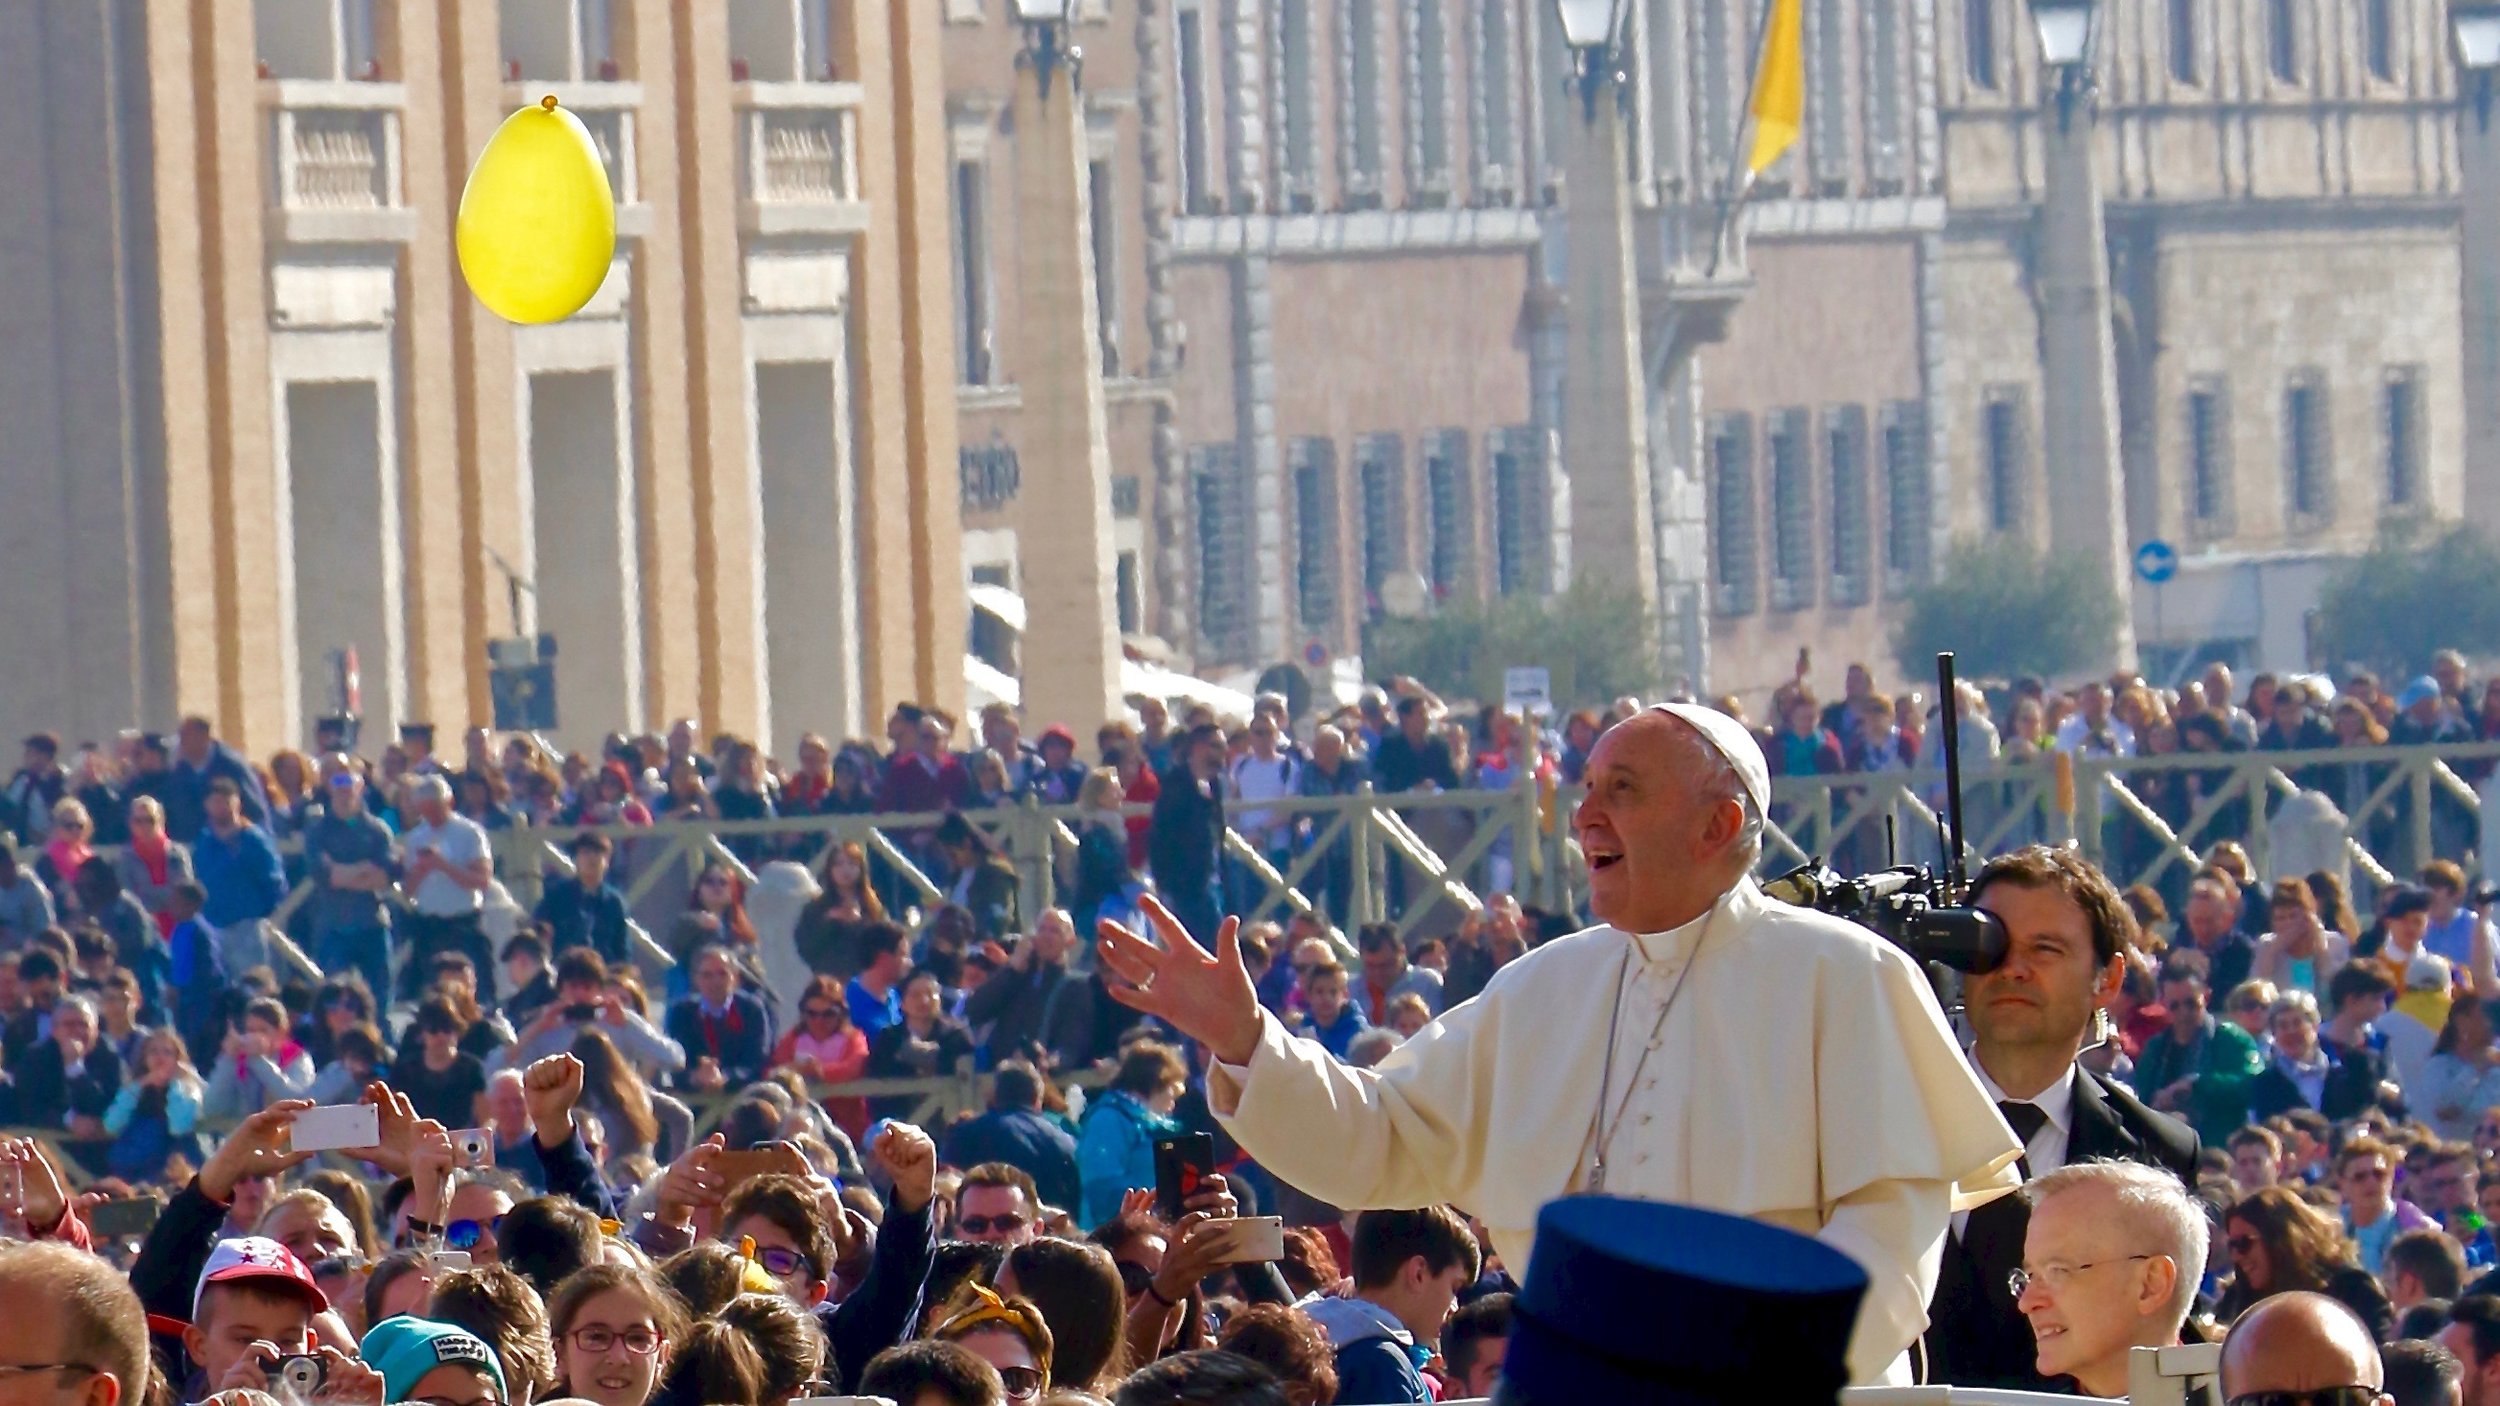 PAPAL AUDIENCE ON MARCH 29, 2017